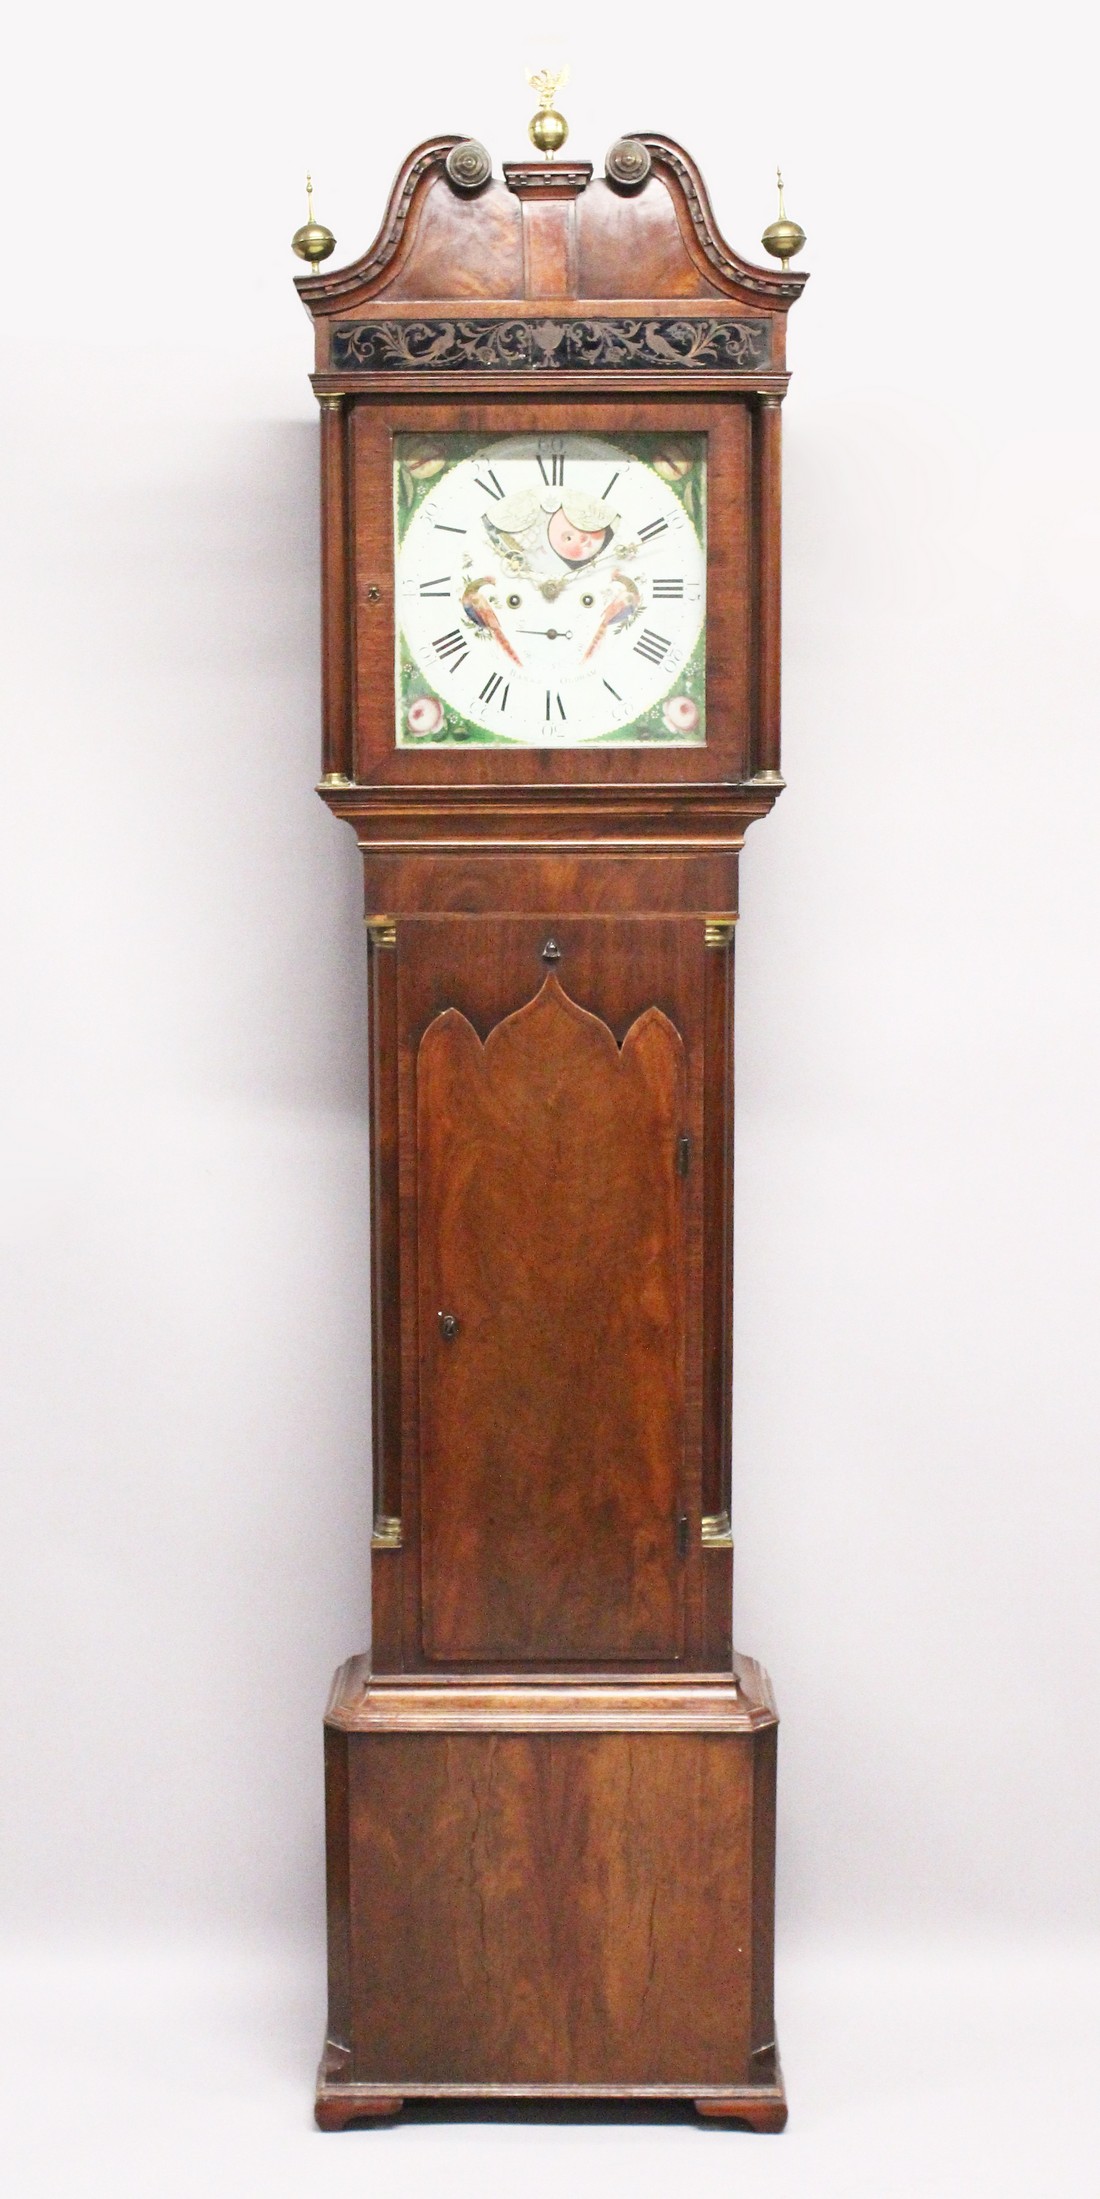 A GEORGE III MAHOGANY LONGCASE CLOCK BY BANKS, OLDHAM, with an eight day moonphase movement,